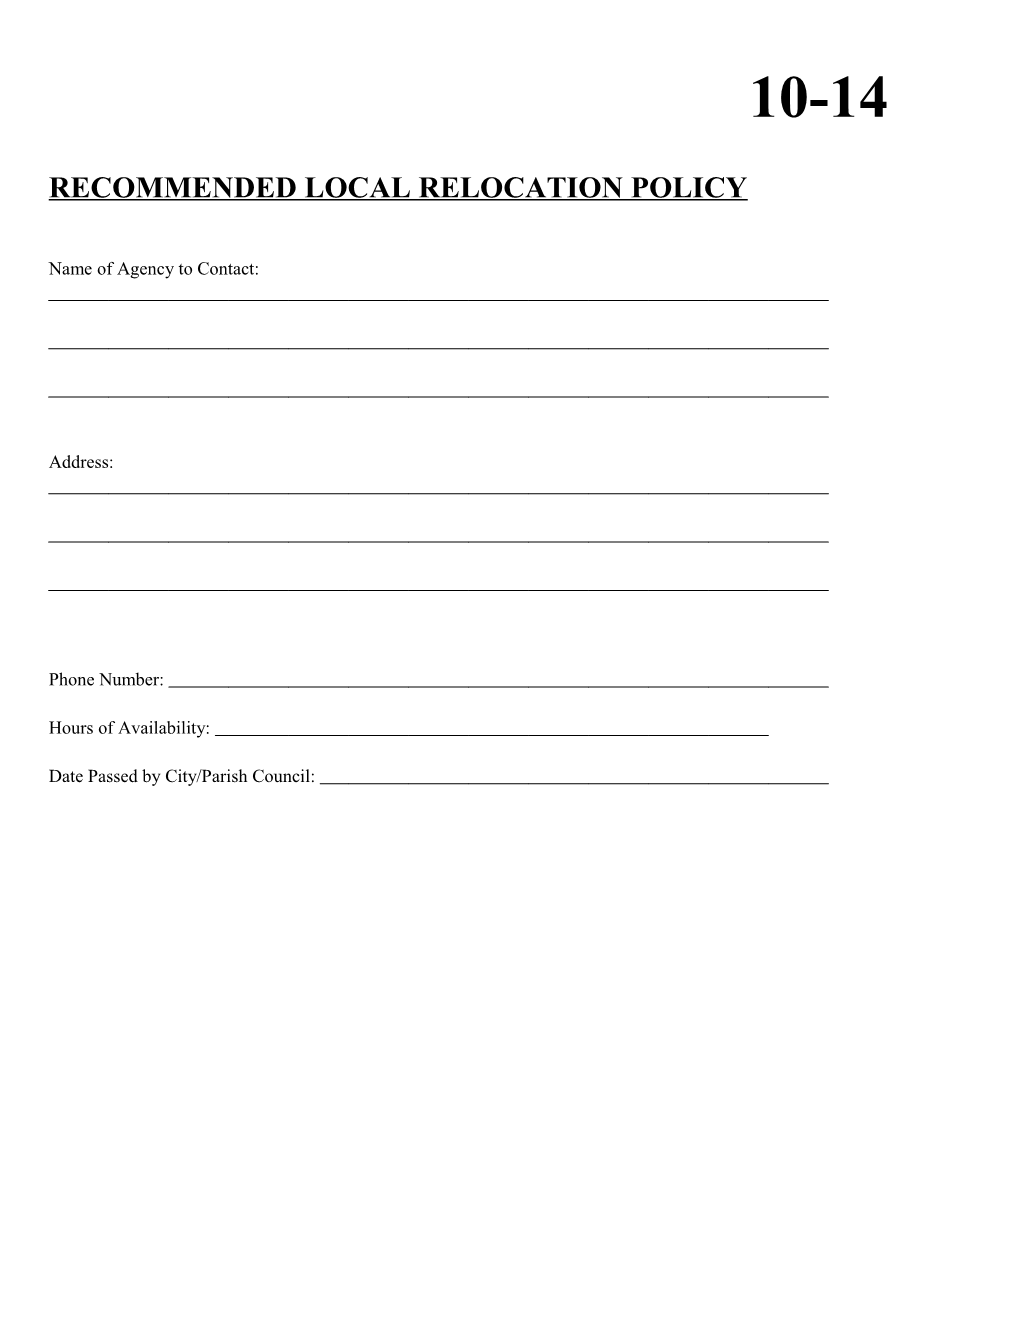 Recommended Local Relocation Policy